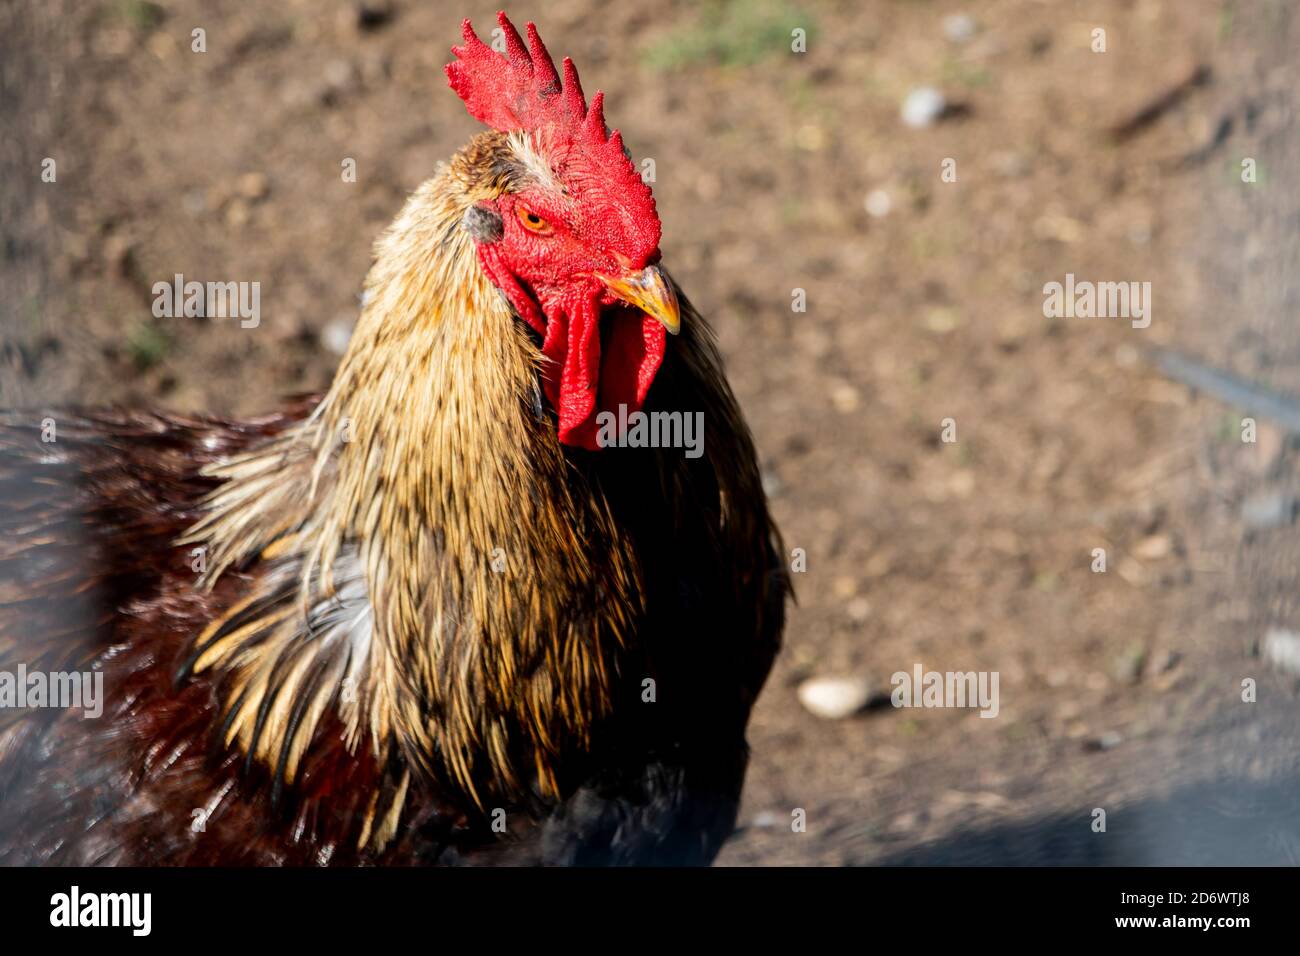 A close up of a rooster hen coq chicken fowl bird poultry in the sunlight on a dirt mud field. Stock Photo